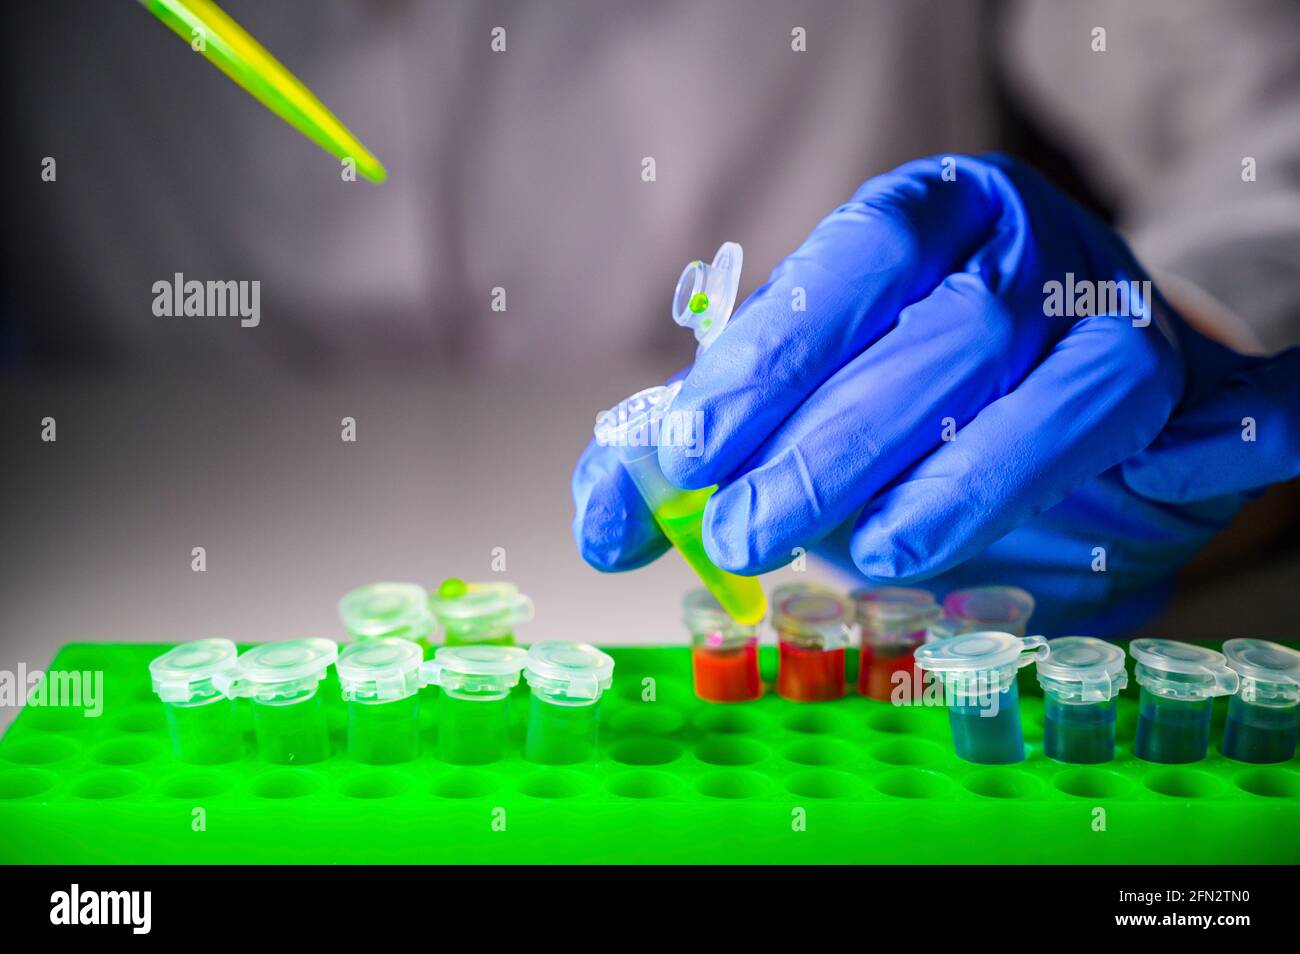 Scientist taking out green chemical solution from eppendorf tube on a white bench background for medicinal chemistry research Stock Photo